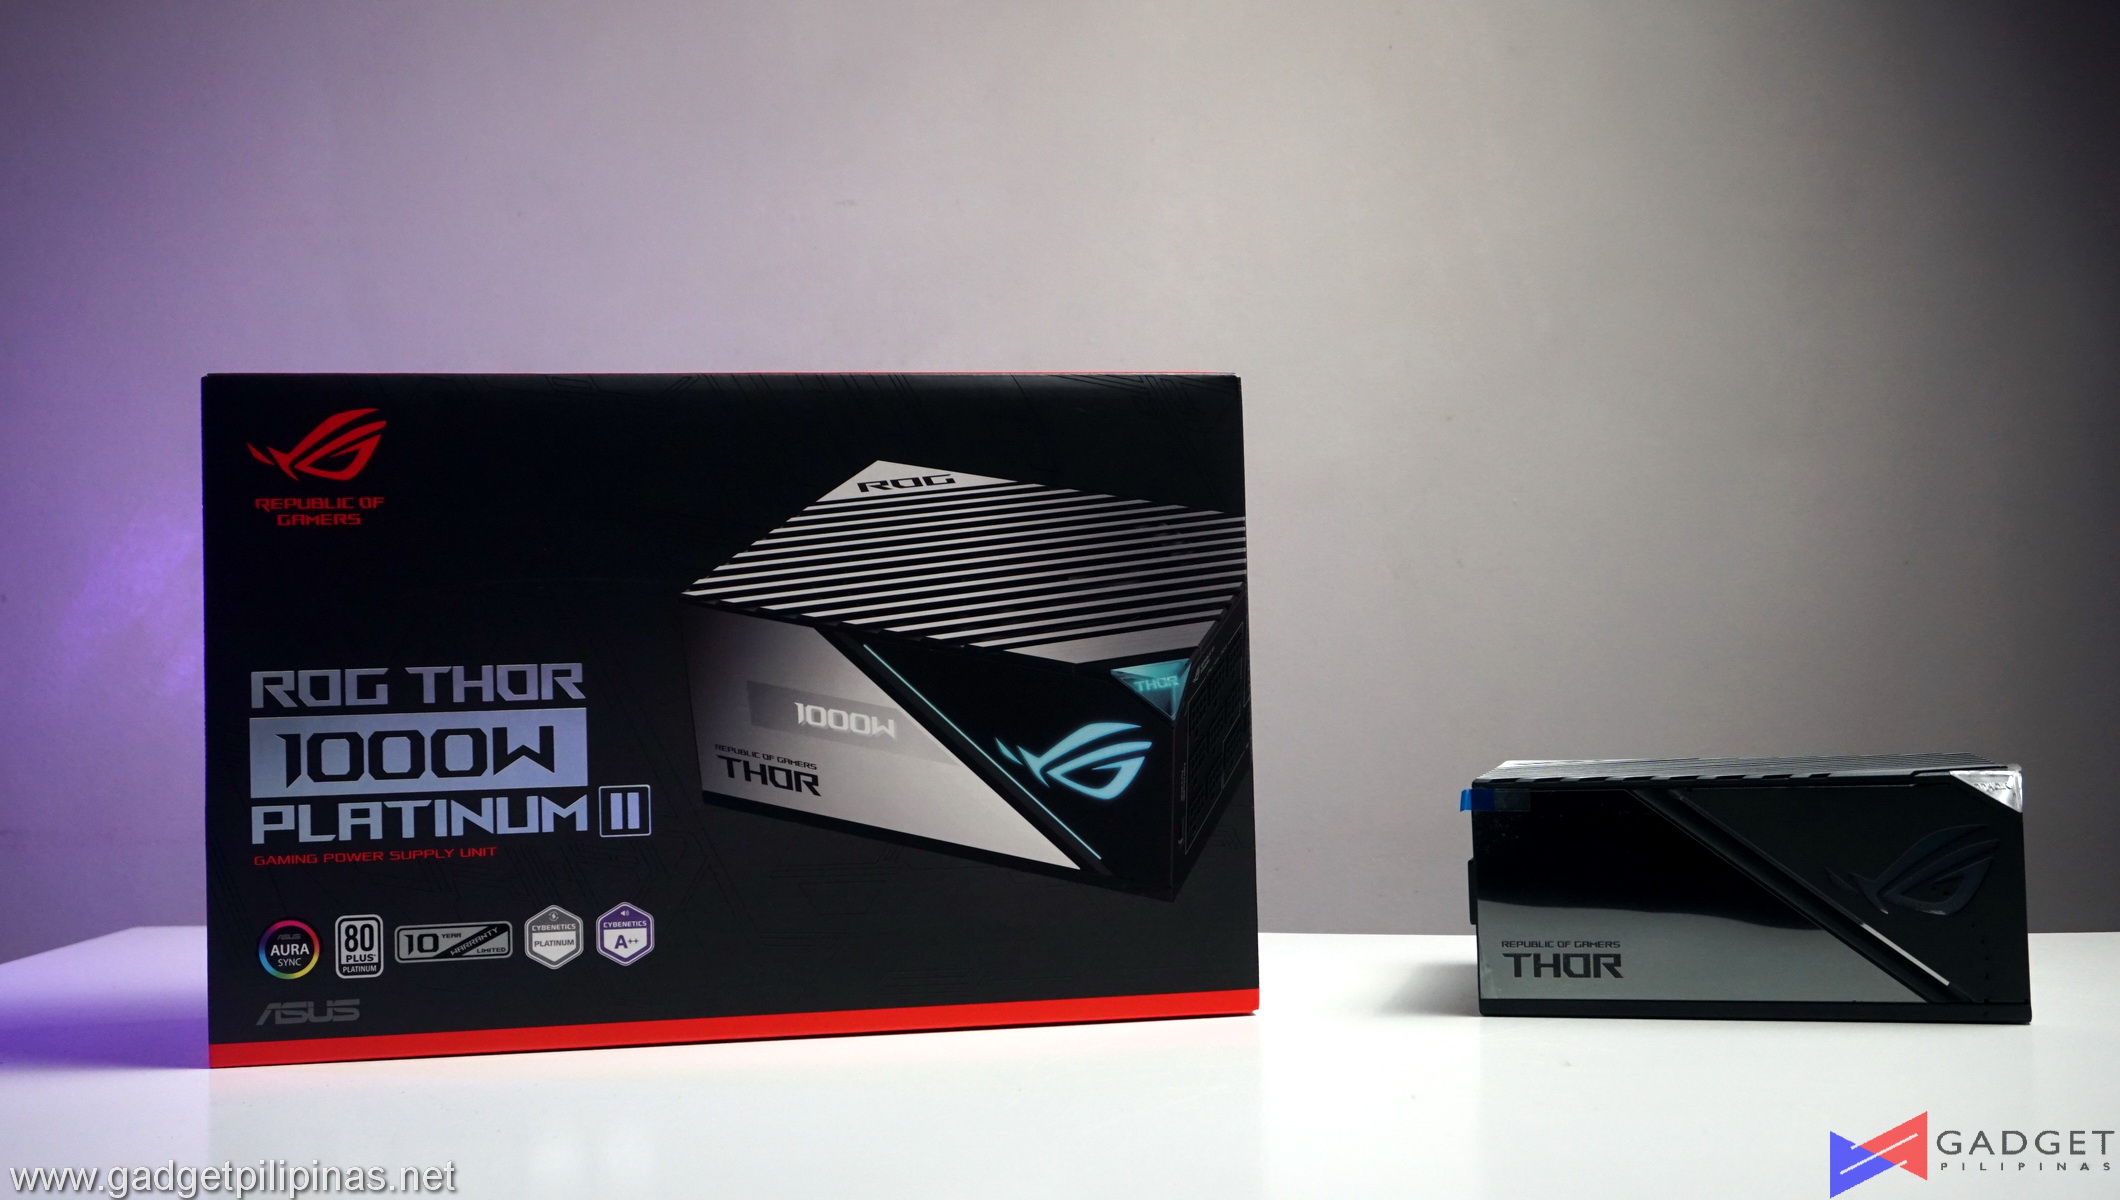 ASUS ROG Thor 1000W Platinum II Power Supply Overview